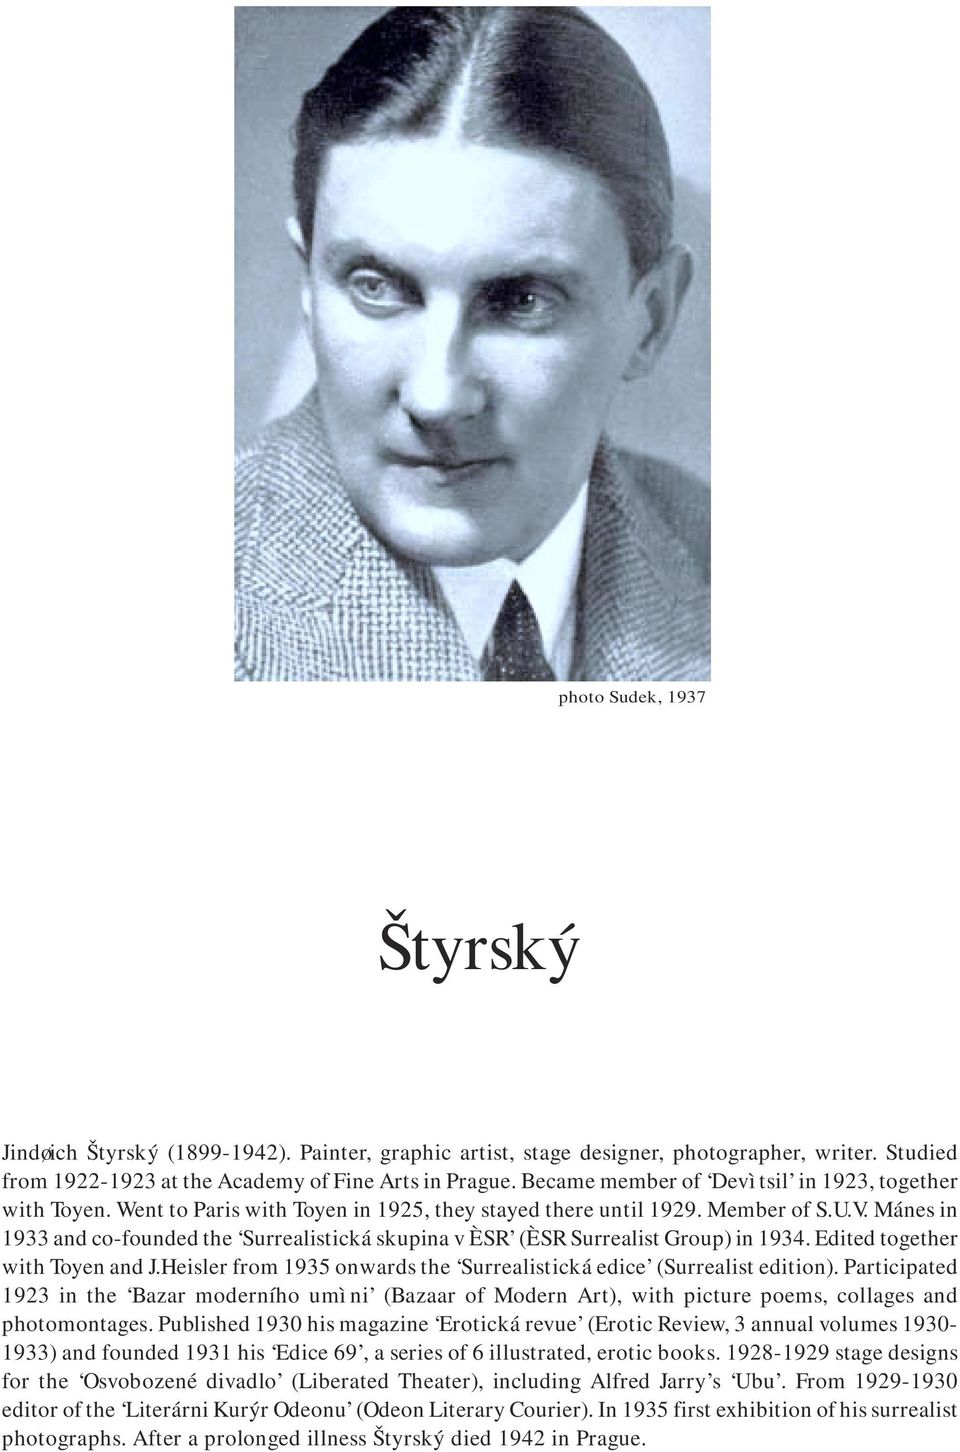 Mánes in 1933 and co-founded the Surrealistická skupina v ÈSR (ÈSR Surrealist Group) in 1934. Edited together with Toyen and J.Heisler from 1935 onwards the Surrealistická edice (Surrealist edition).